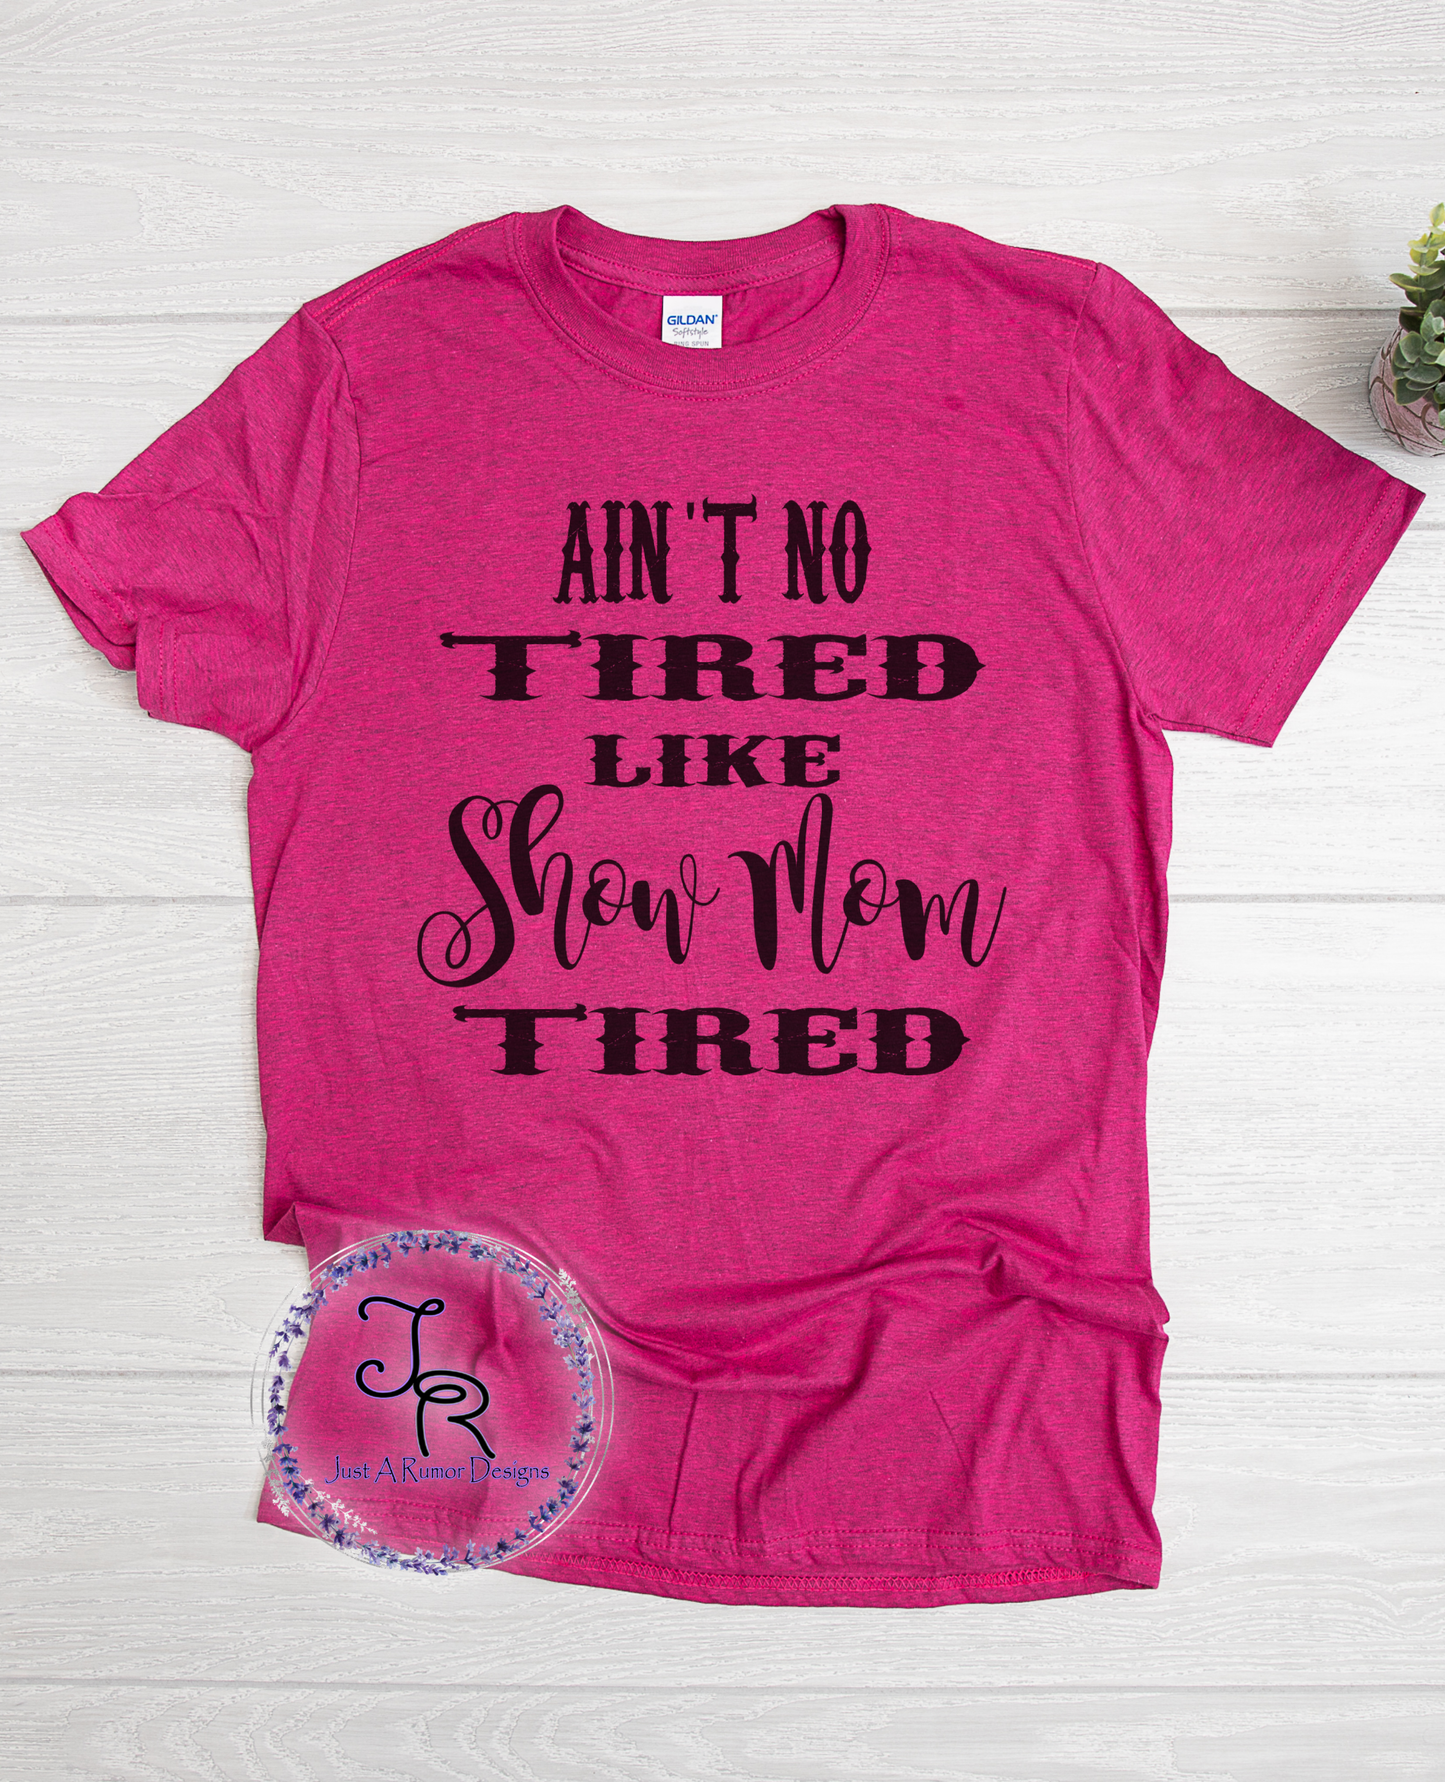 Show Mom Tired Shirt